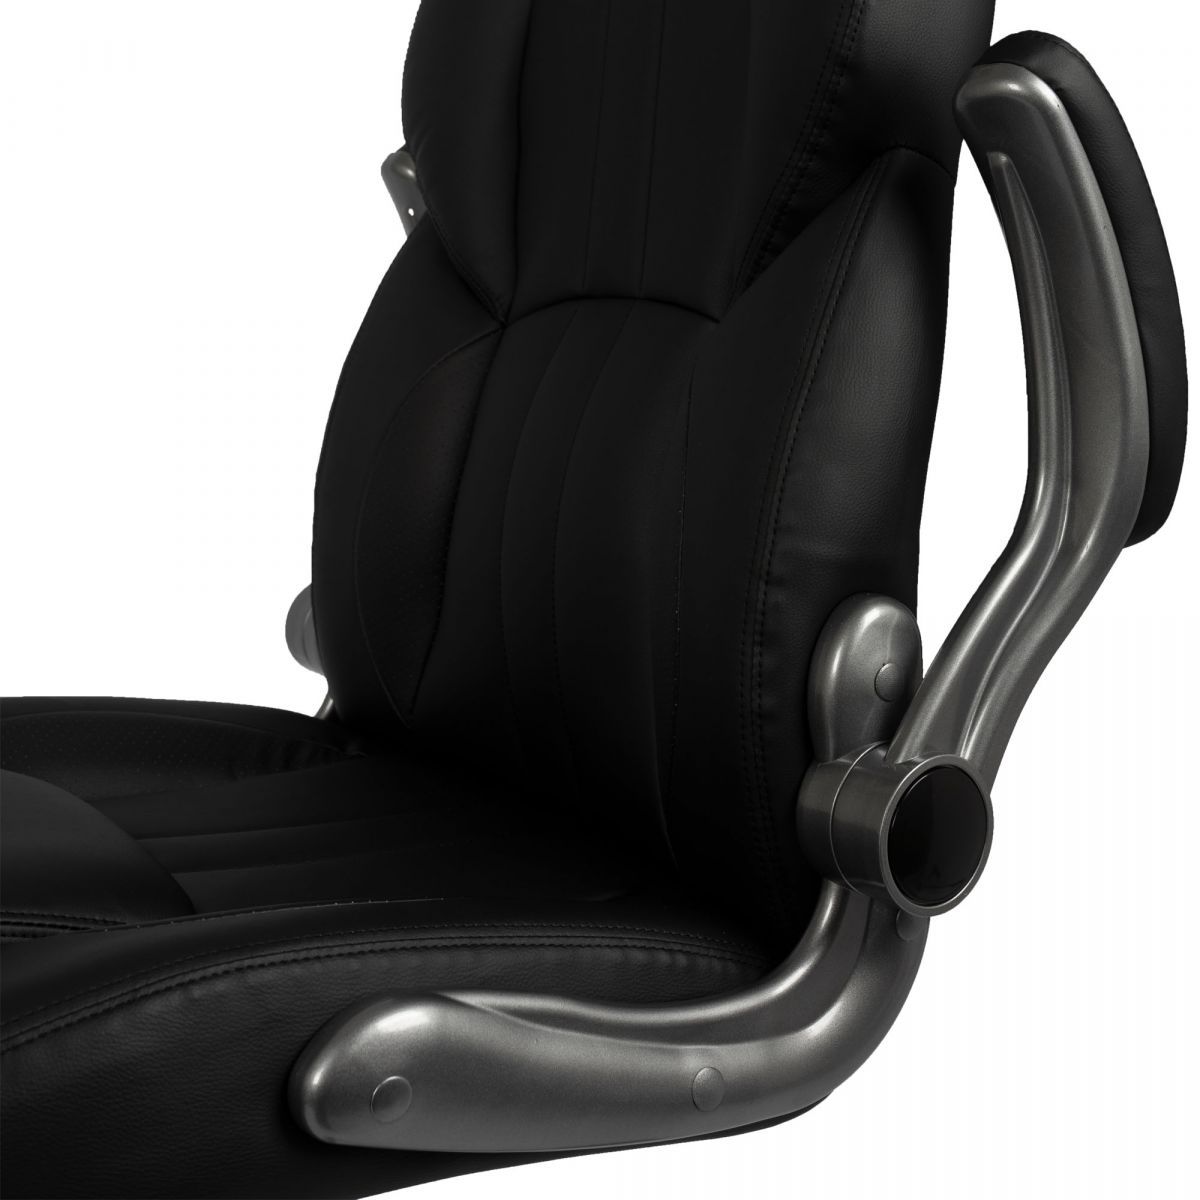 Ergodu Luxury Office Chair with adjustable armrests